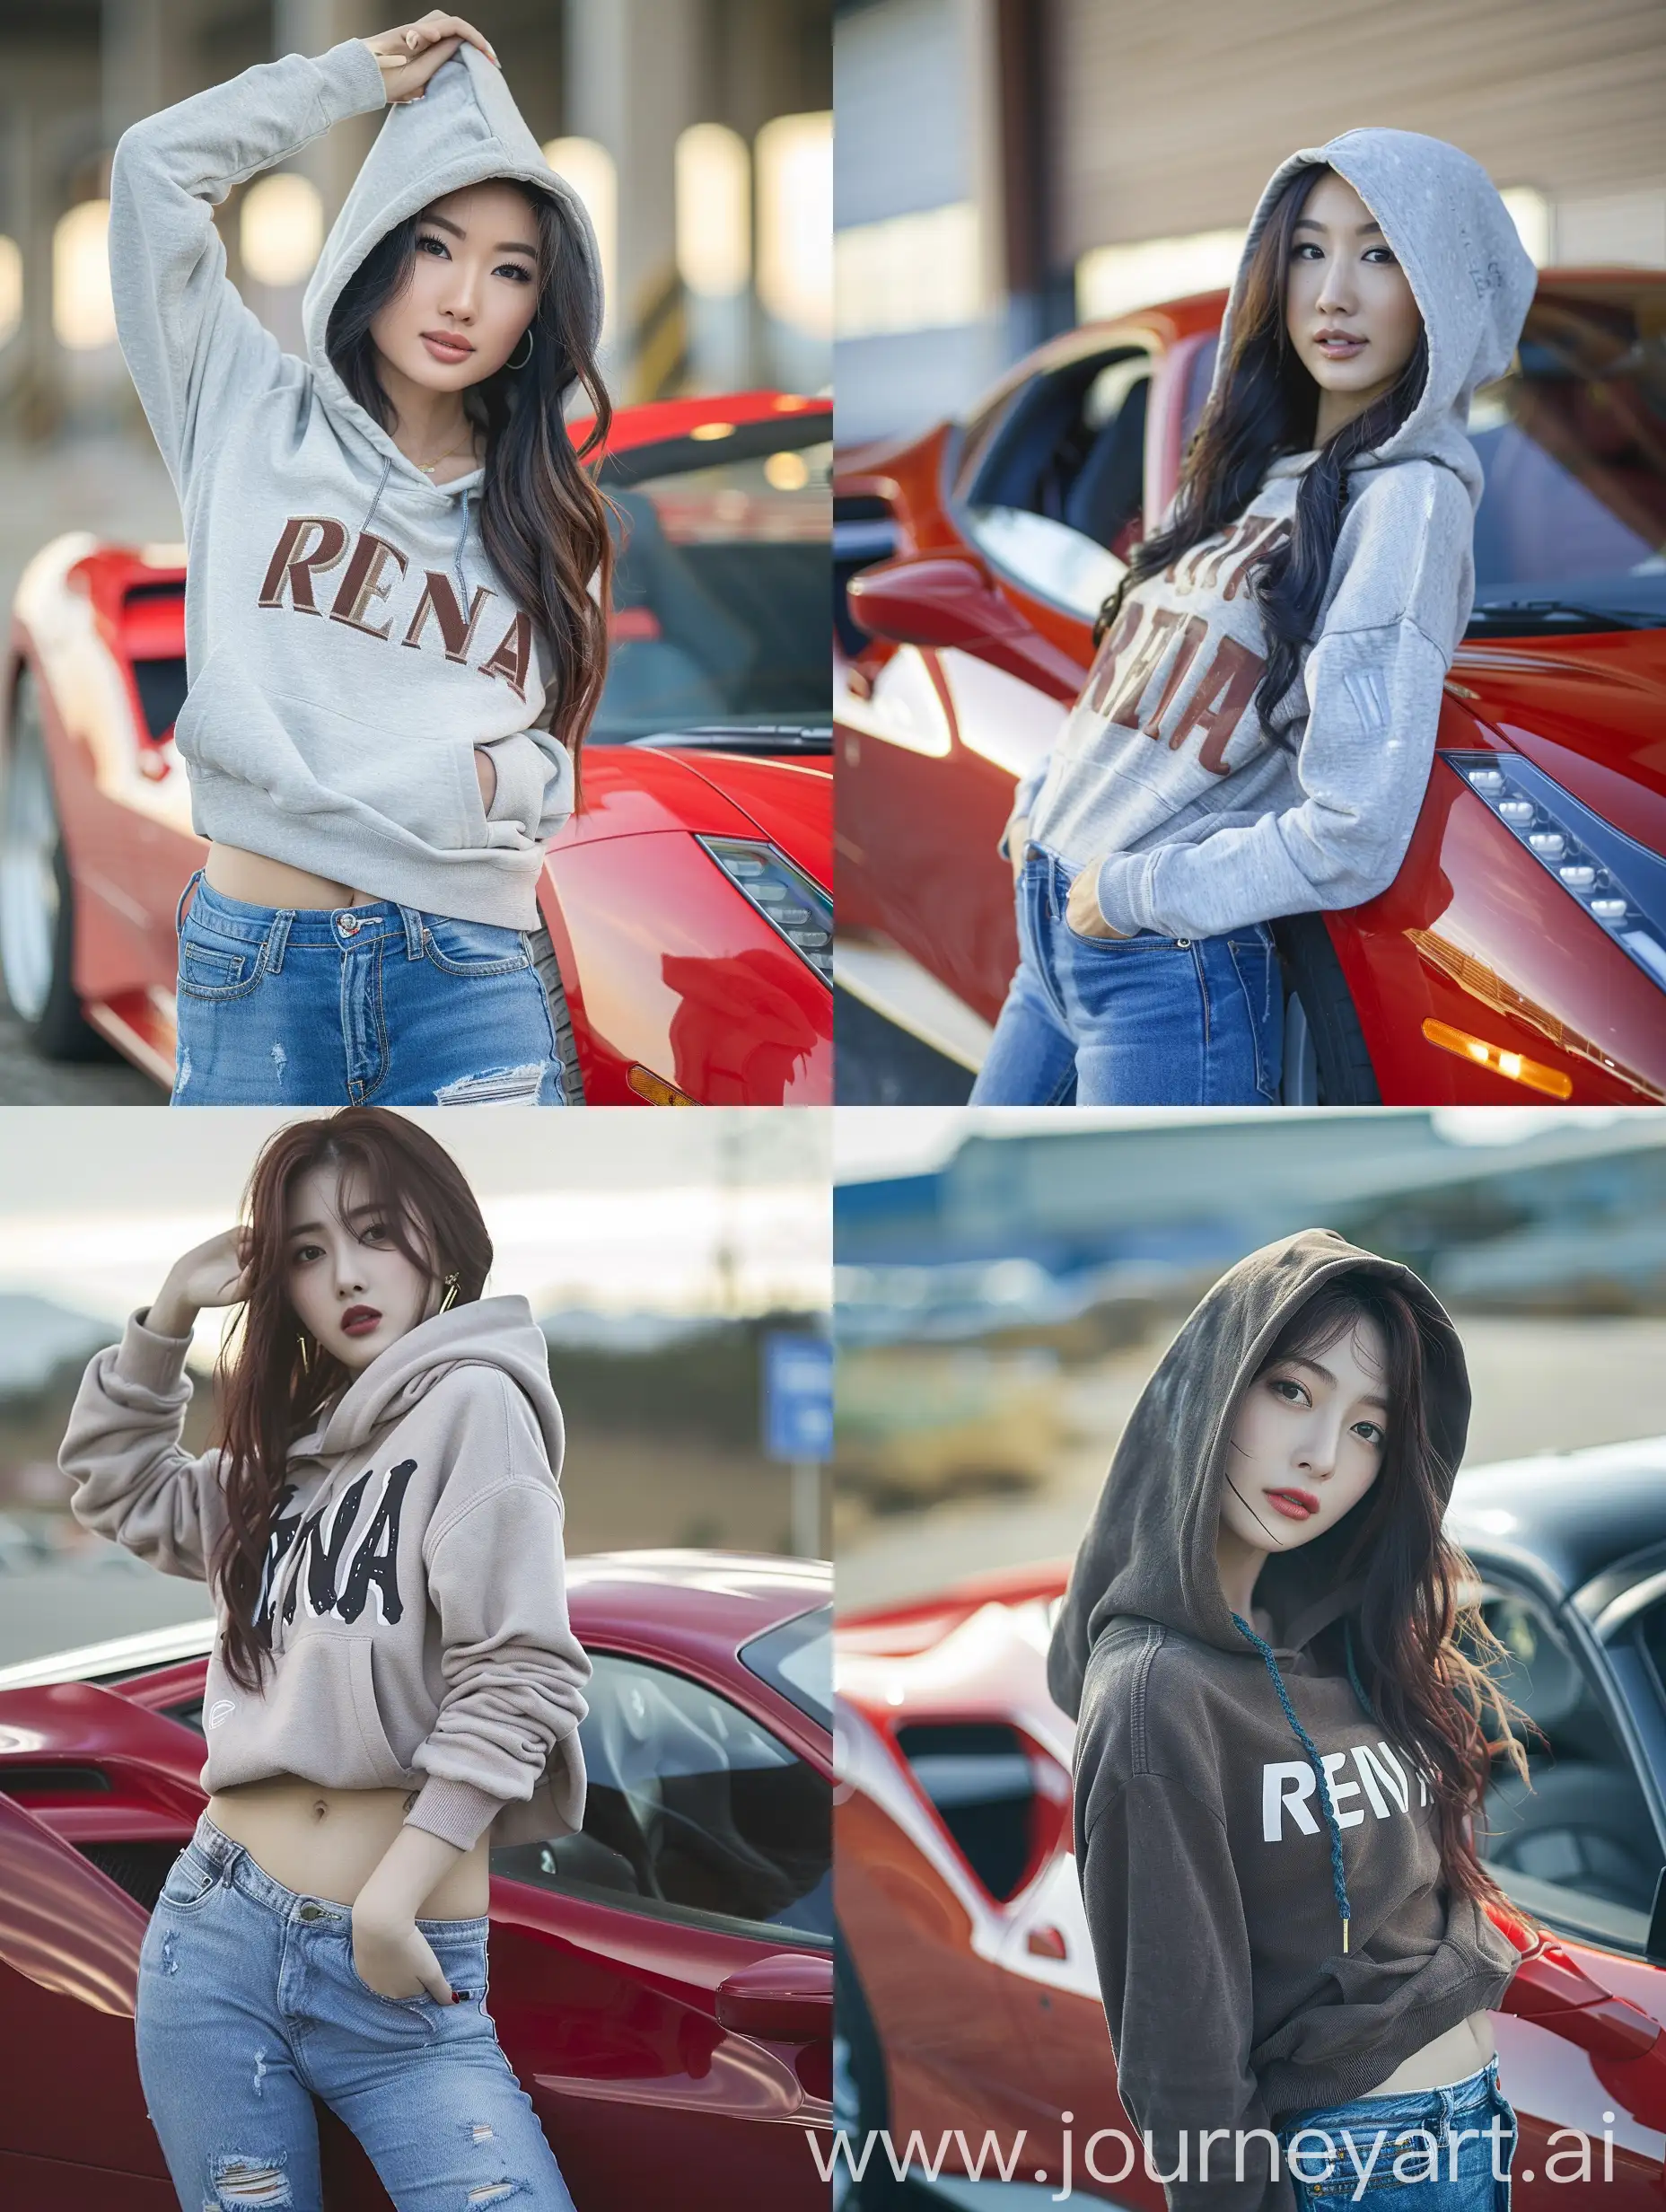 Stylish-Asian-Woman-Posing-with-Red-Ferrari-in-RENA-Hoodie-and-Jeans